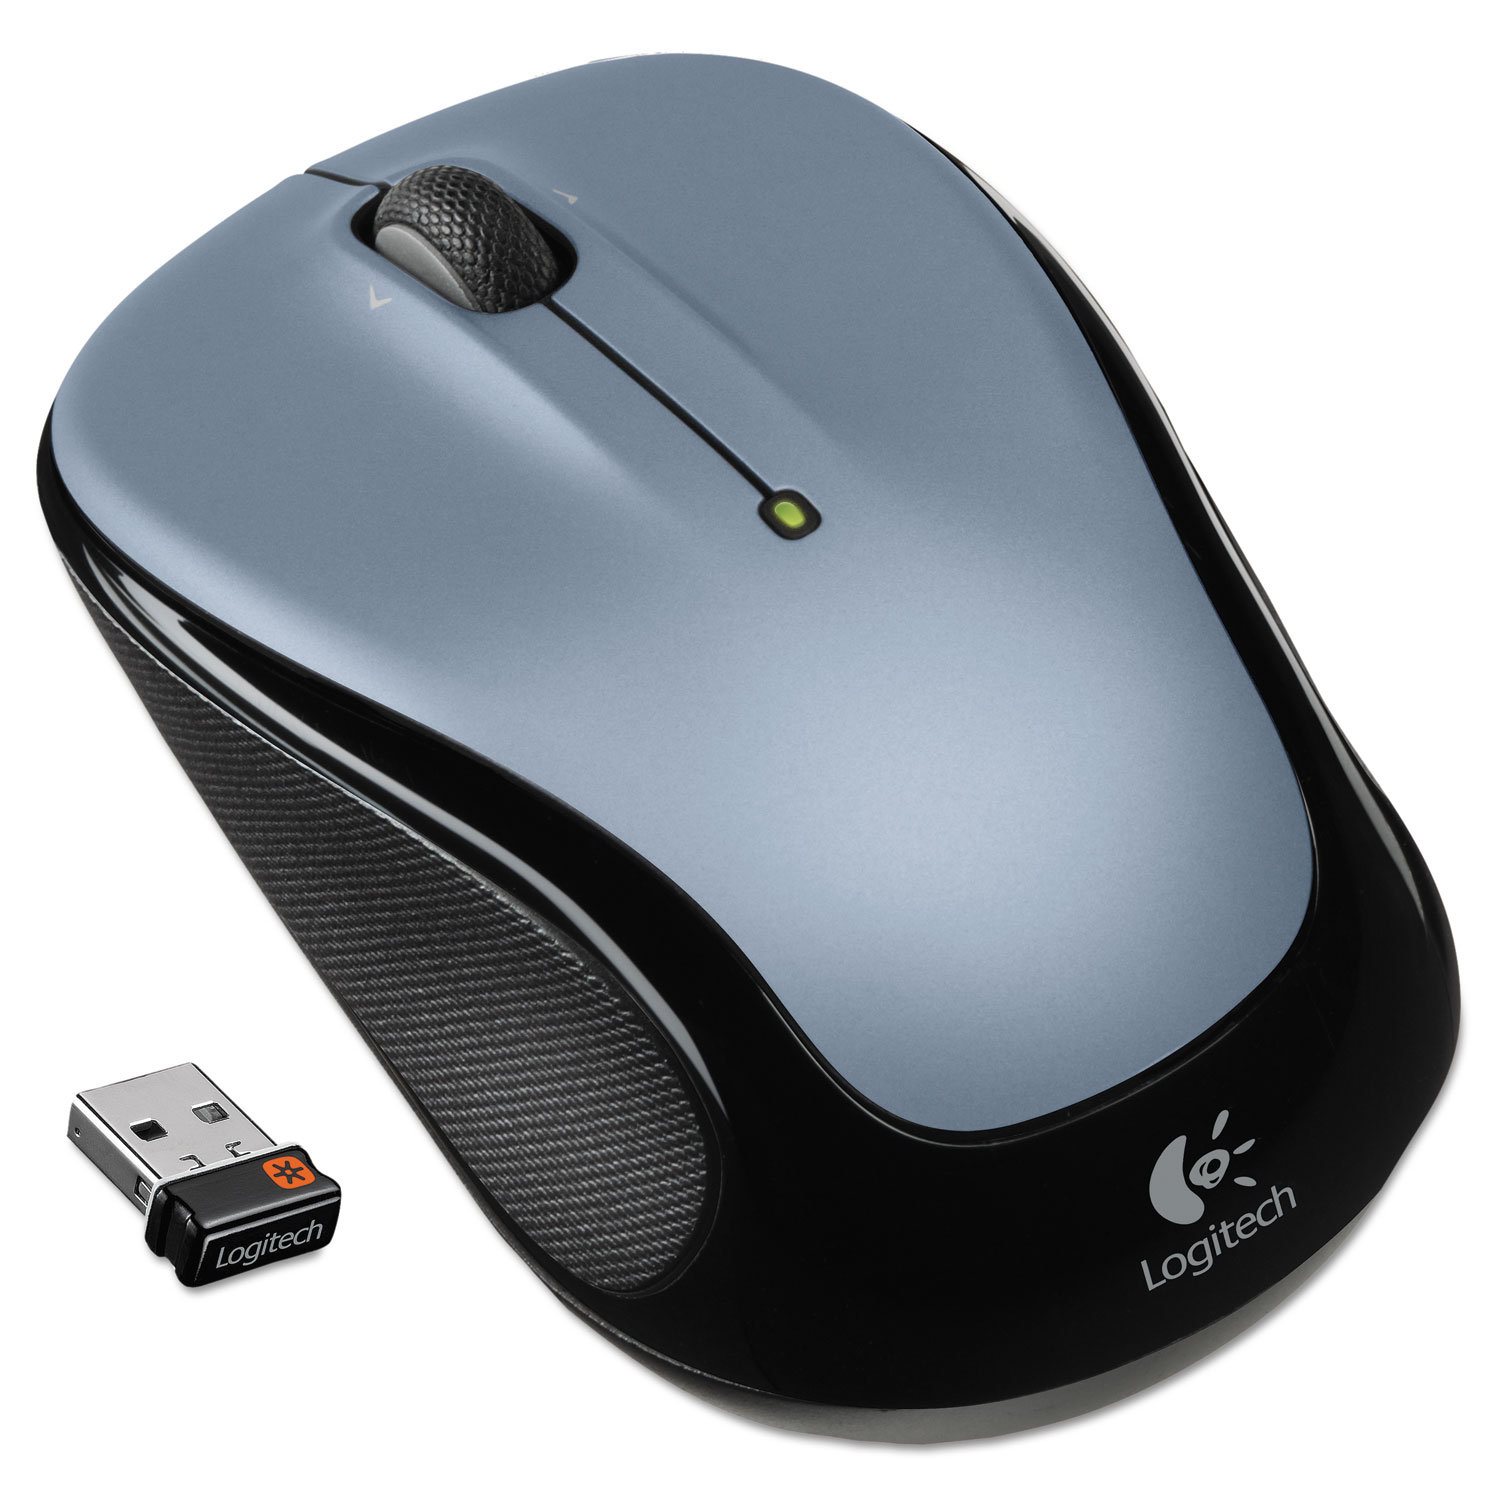  Logitech 910-002332 M325 Wireless Mouse, 2.4 GHz Frequency/30 ft Wireless Range, Left/Right Hand Use, Silver (LOG910002332) 